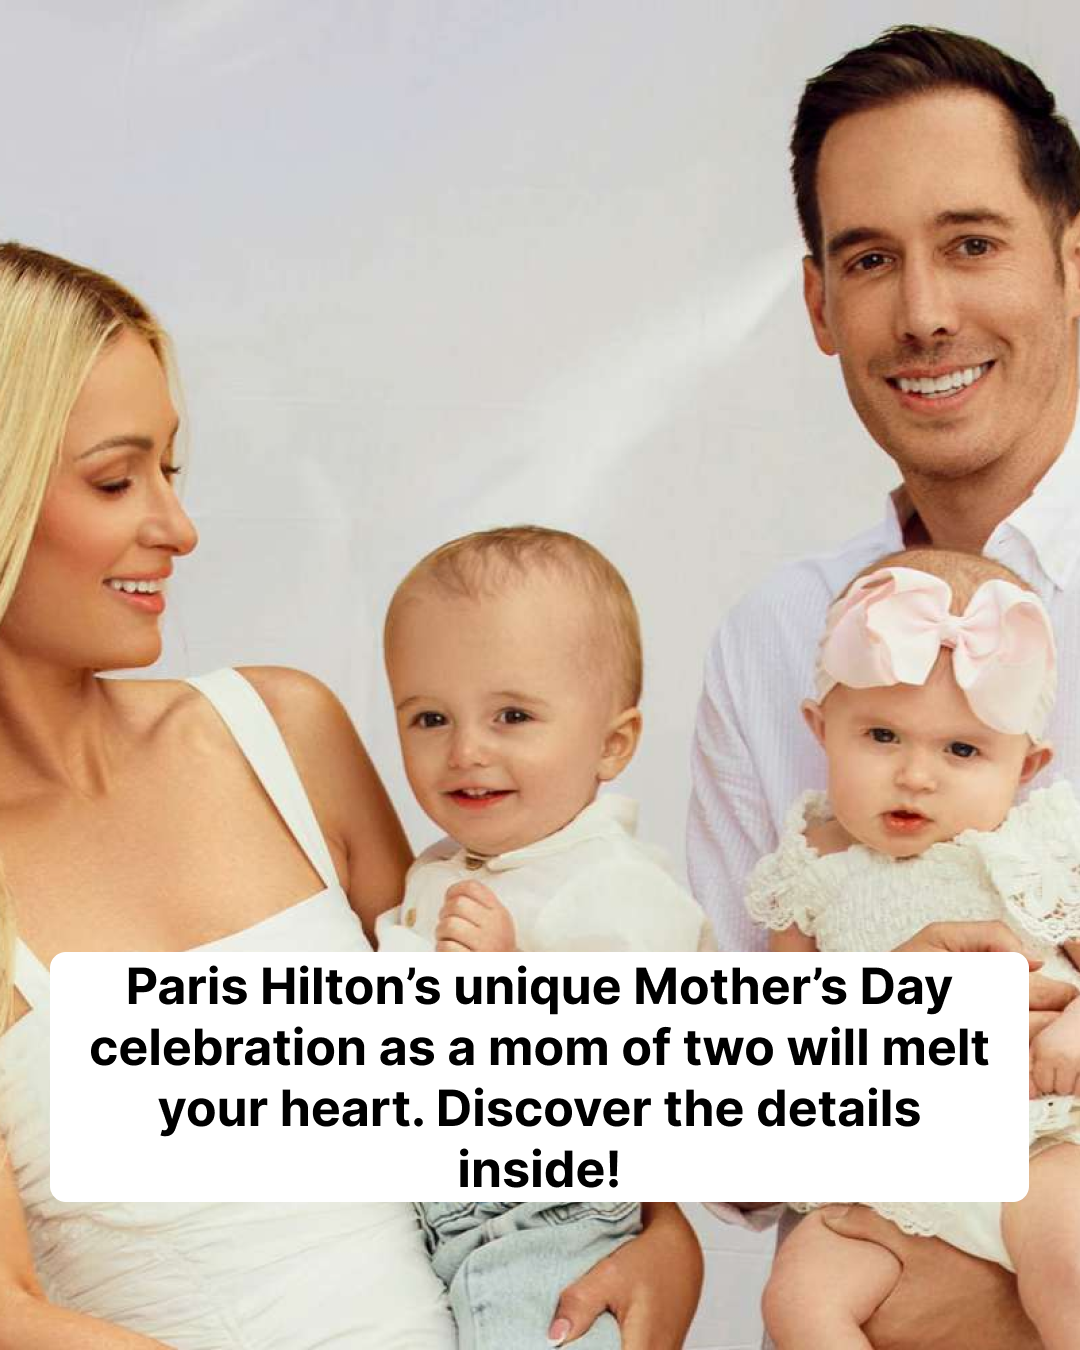 Paris Hilton Celebrates First Mother’s Day as a Mom of 2: ‘My Heart Is So Full Today’